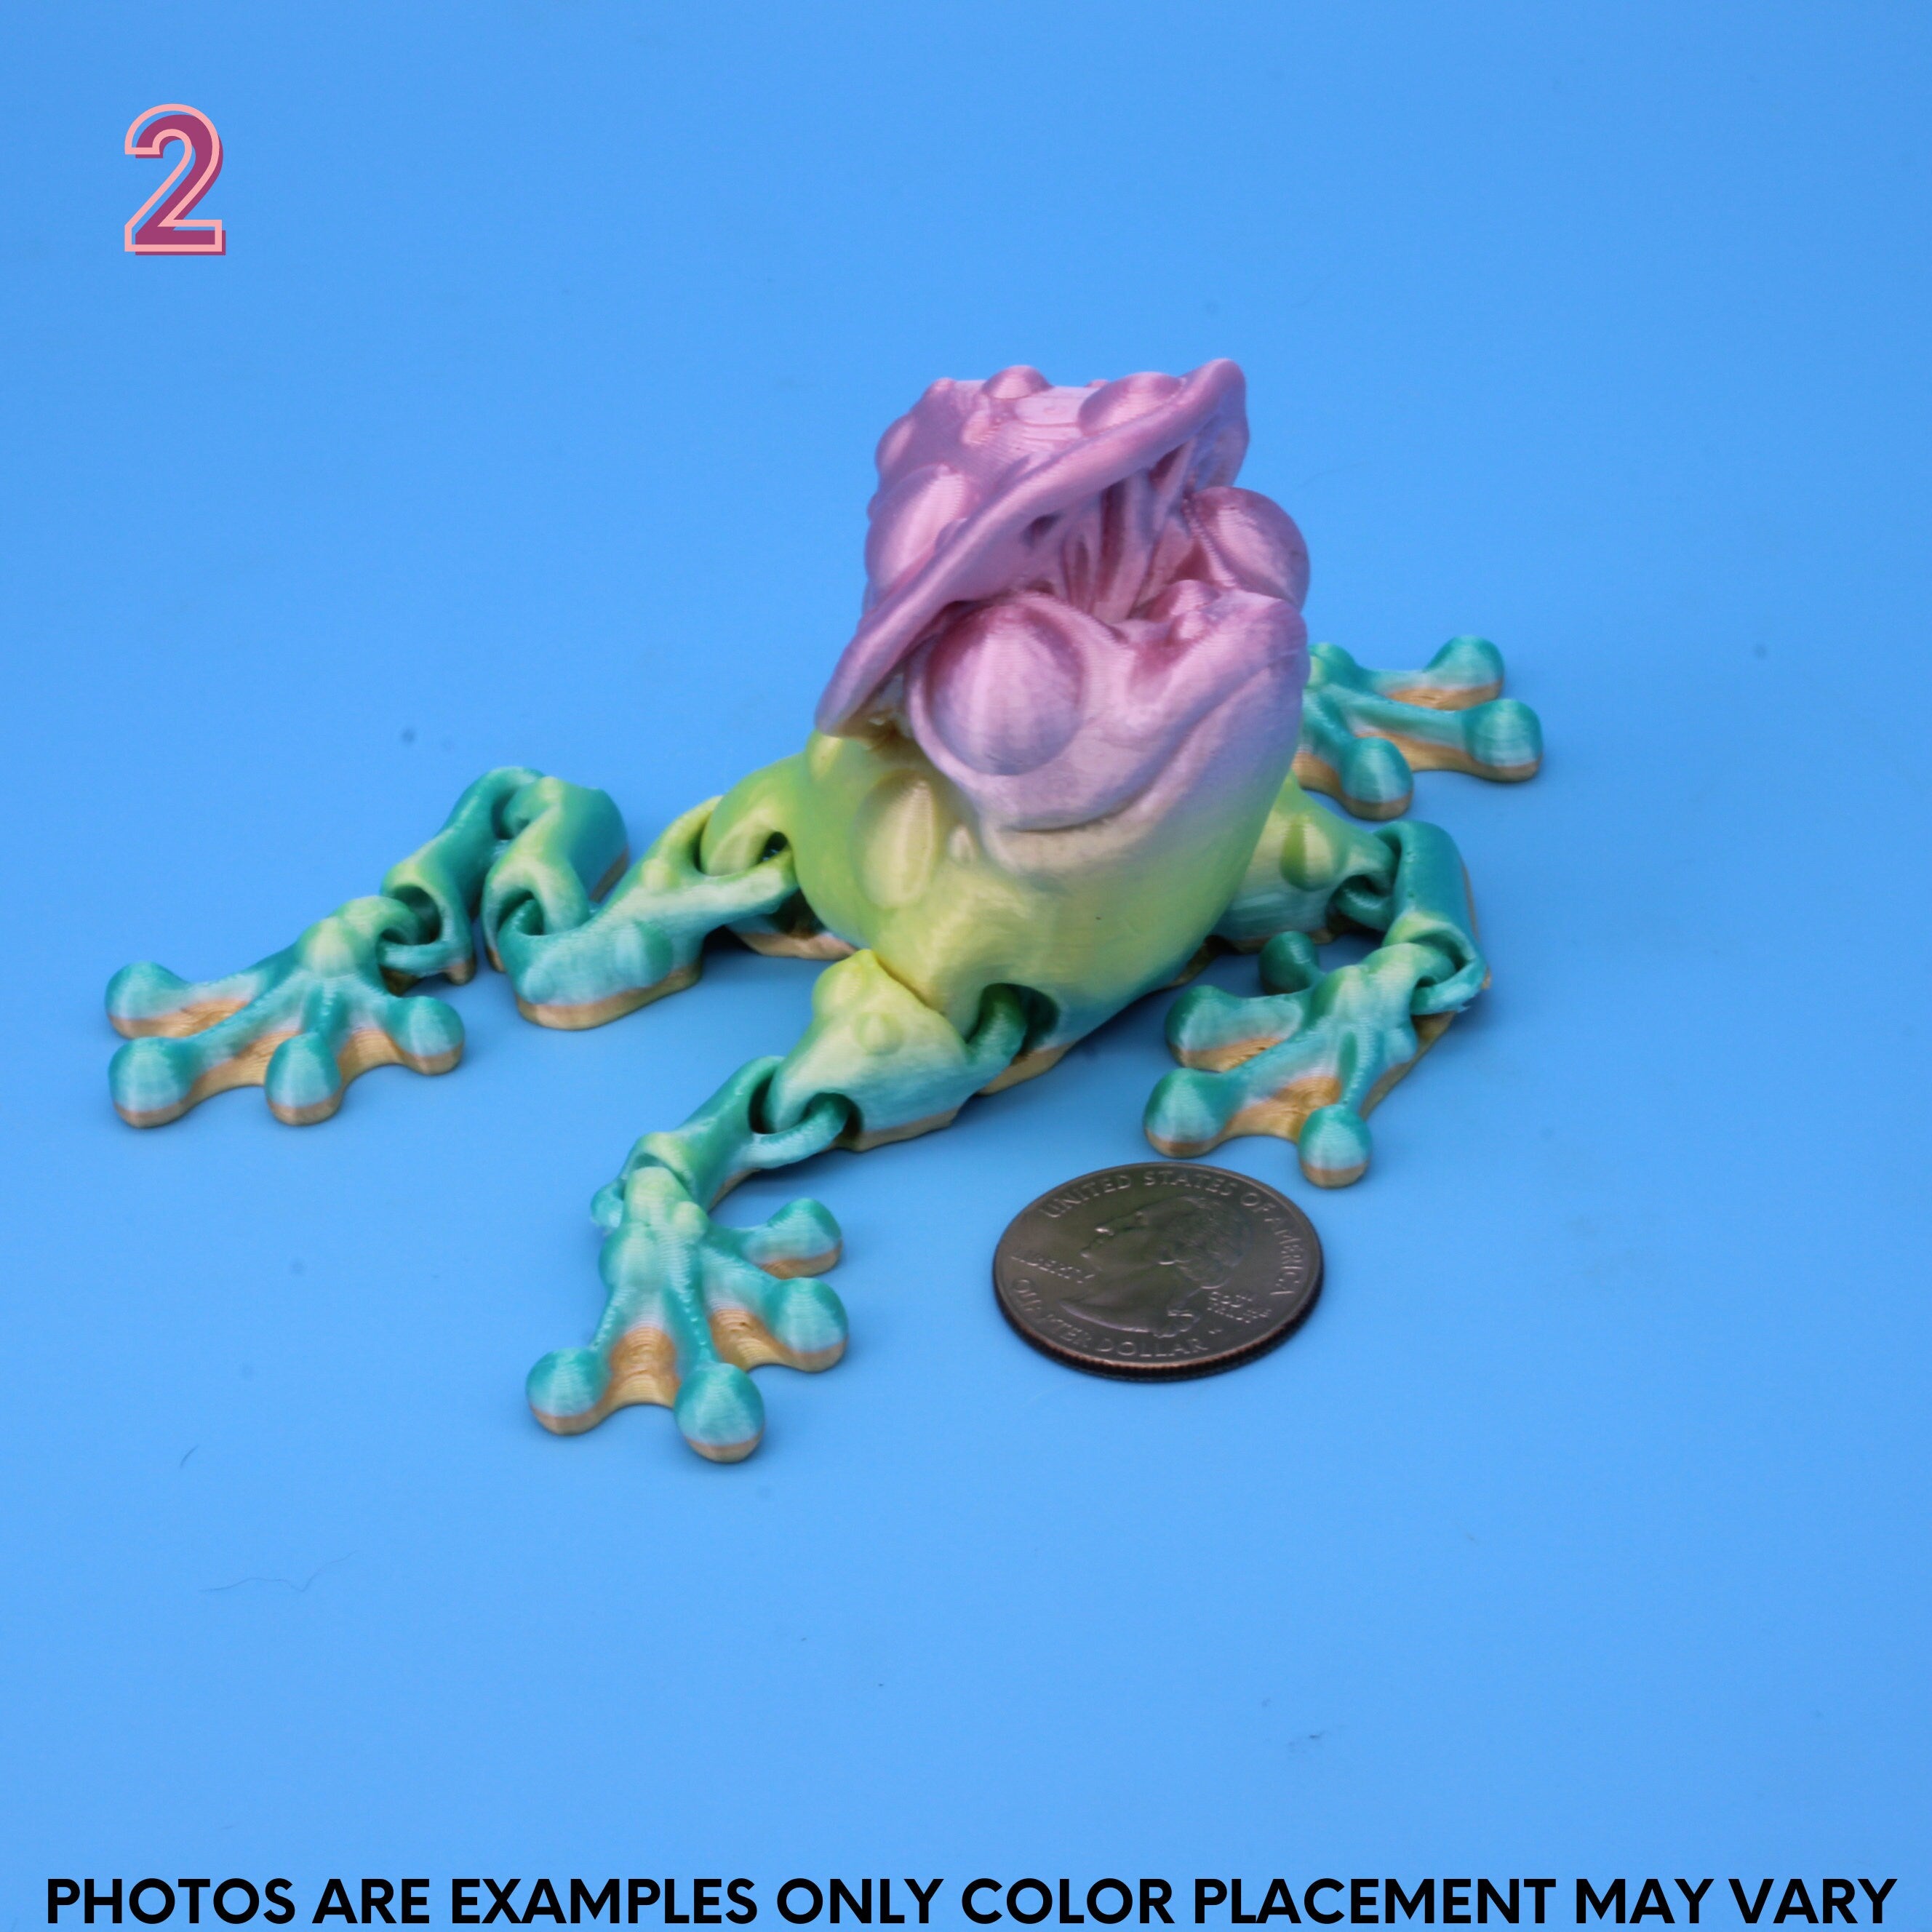 Cute Frogs 3D Printed Fidget Toy, Articulating Frog. - Authorized Seller of Cinderwing